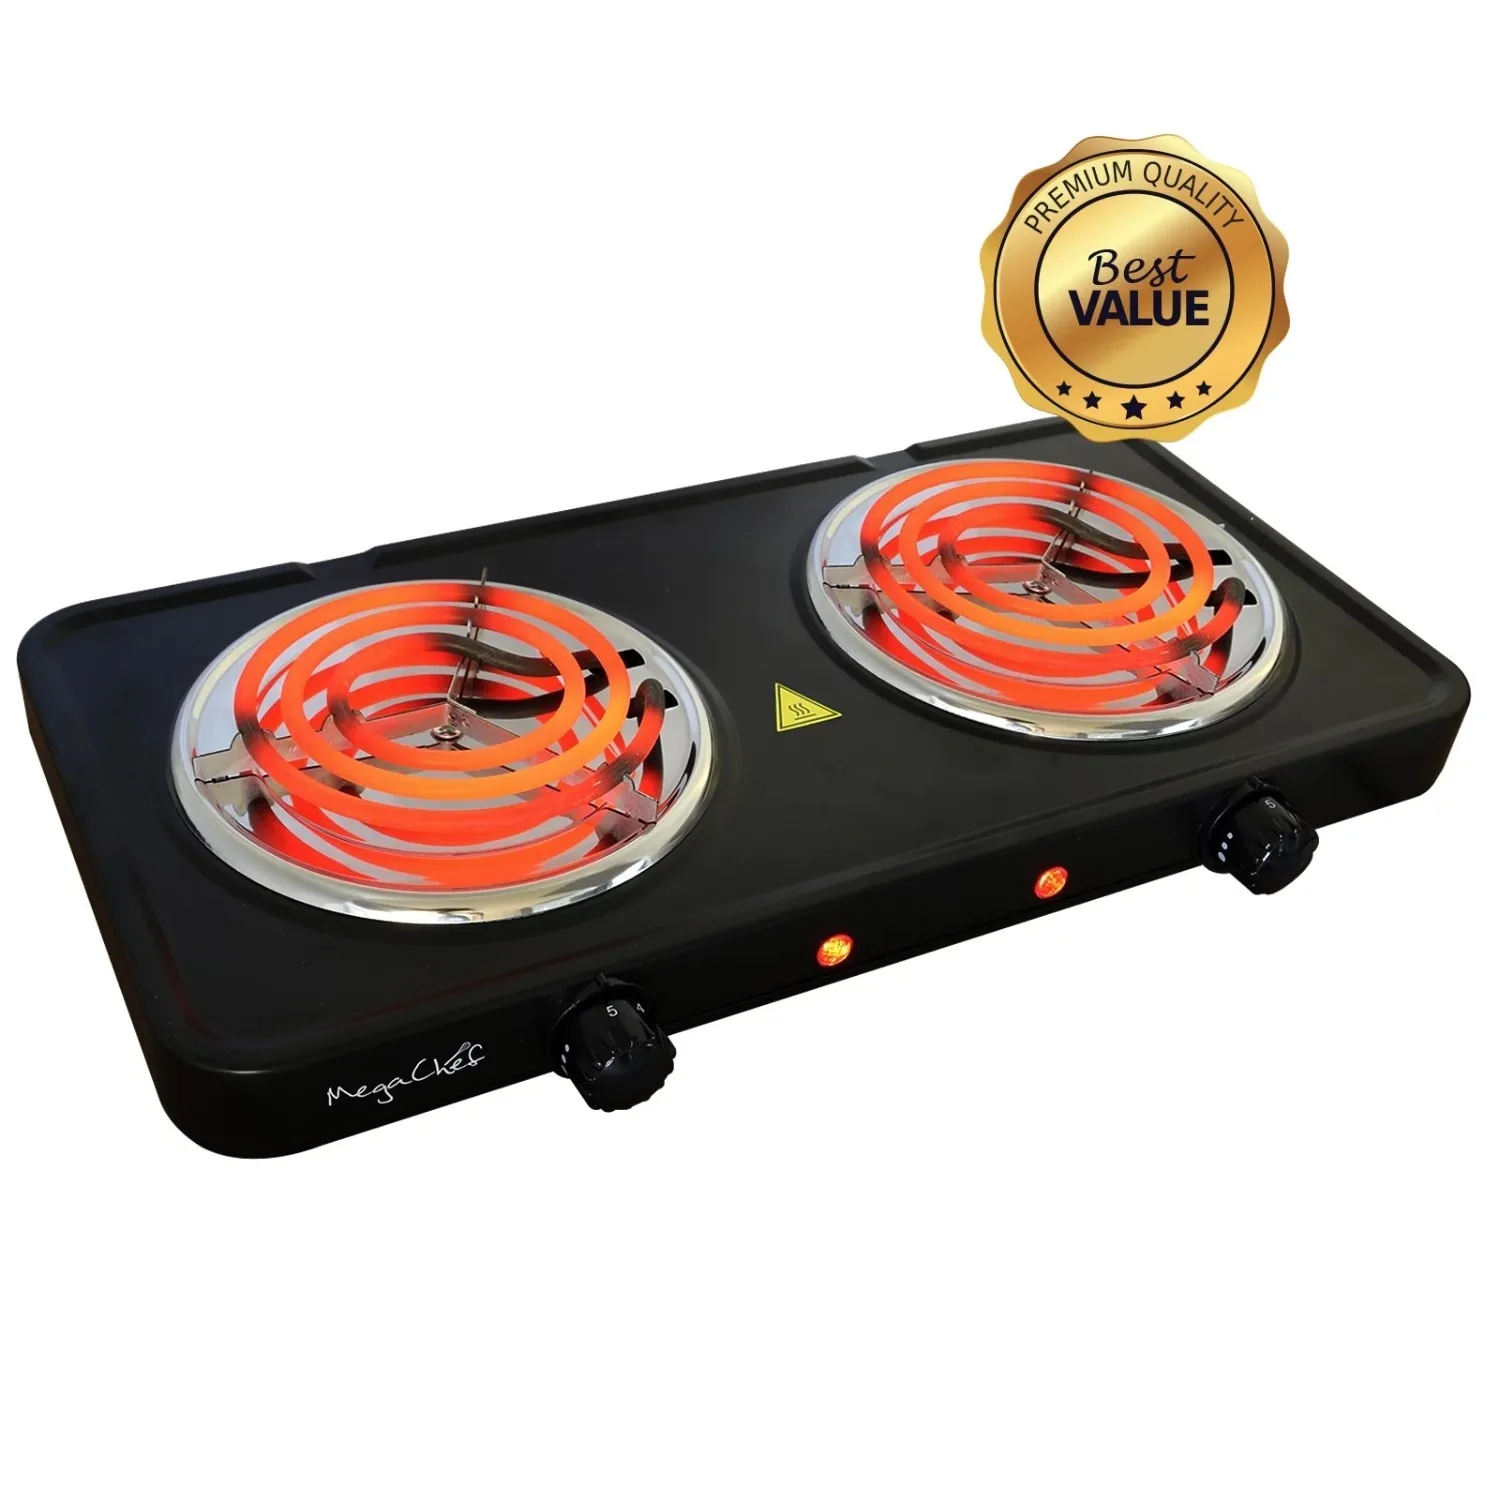 

Easily Portable Ultra Lightweight Dual Coil Burner Cooktop Buffet Range in Matte Black gas stove